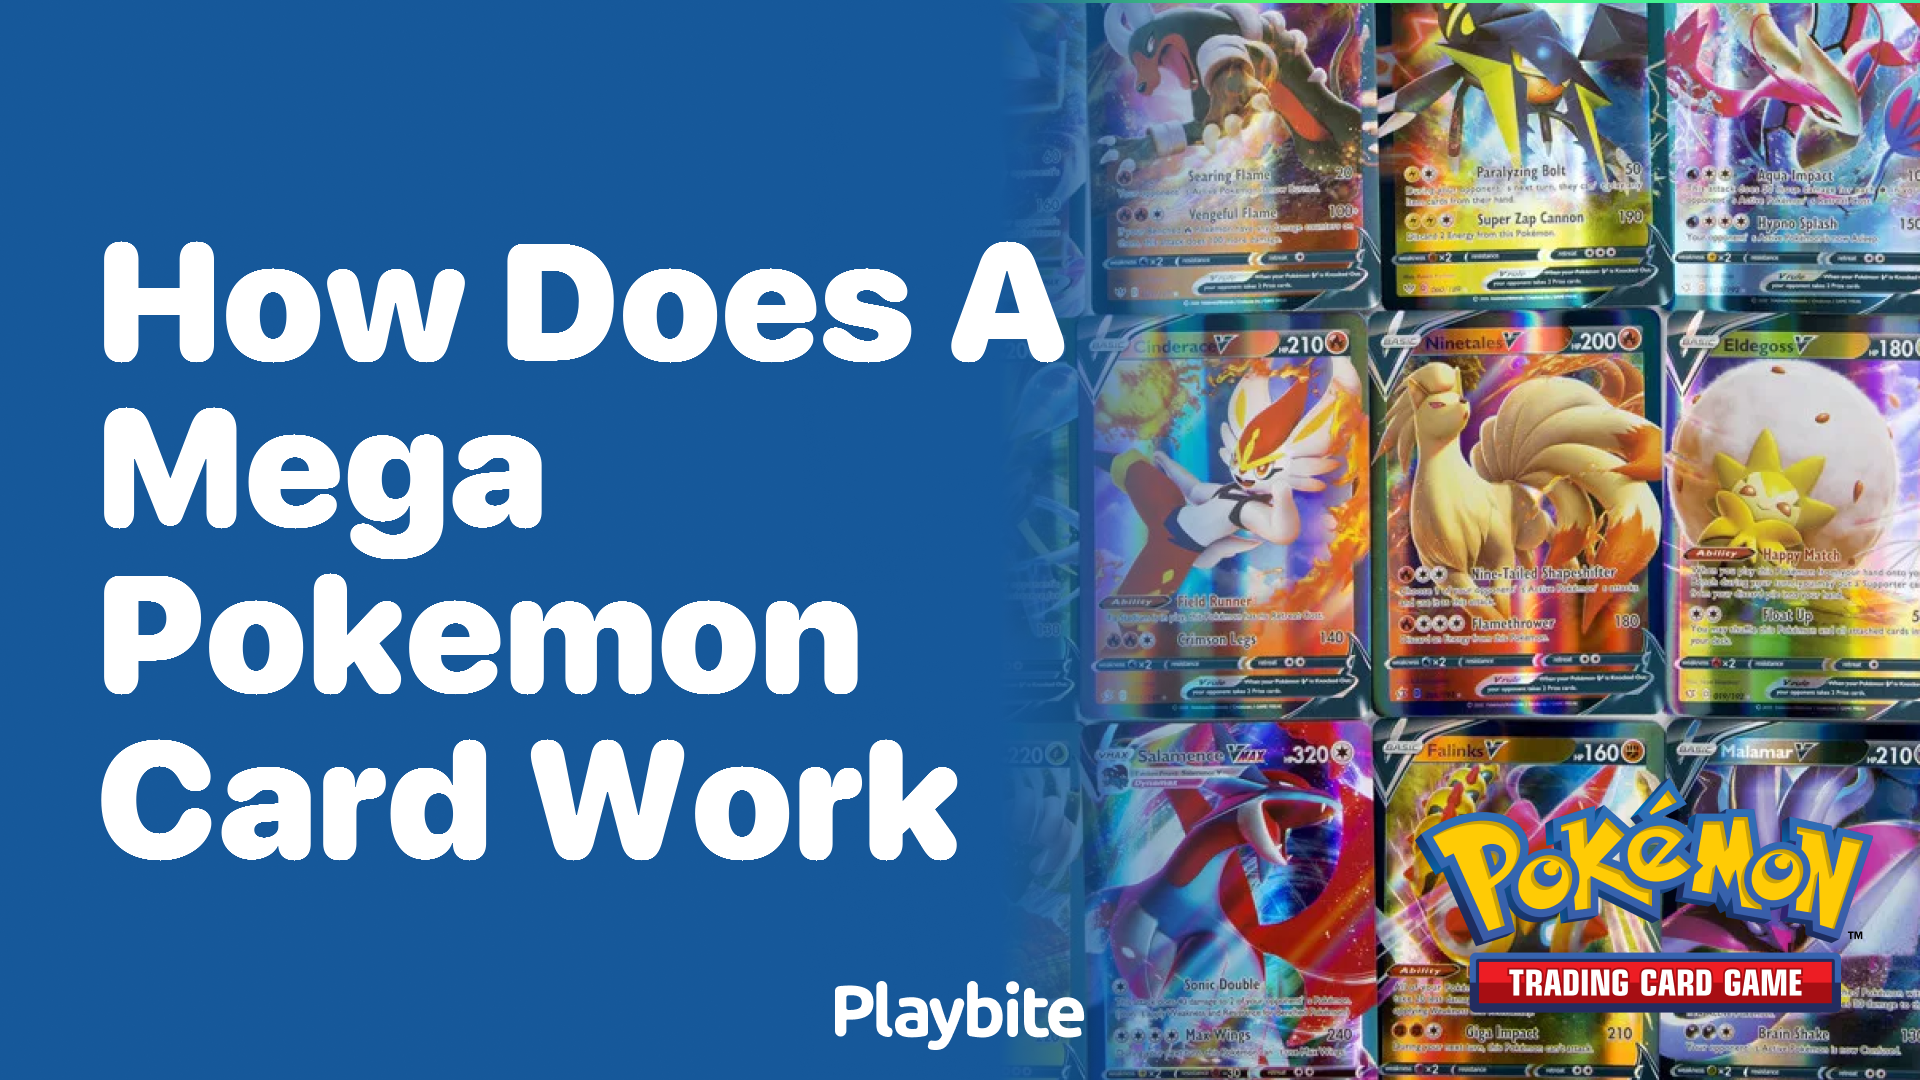 How does a Mega Pokemon card work in the Pokemon TCG?